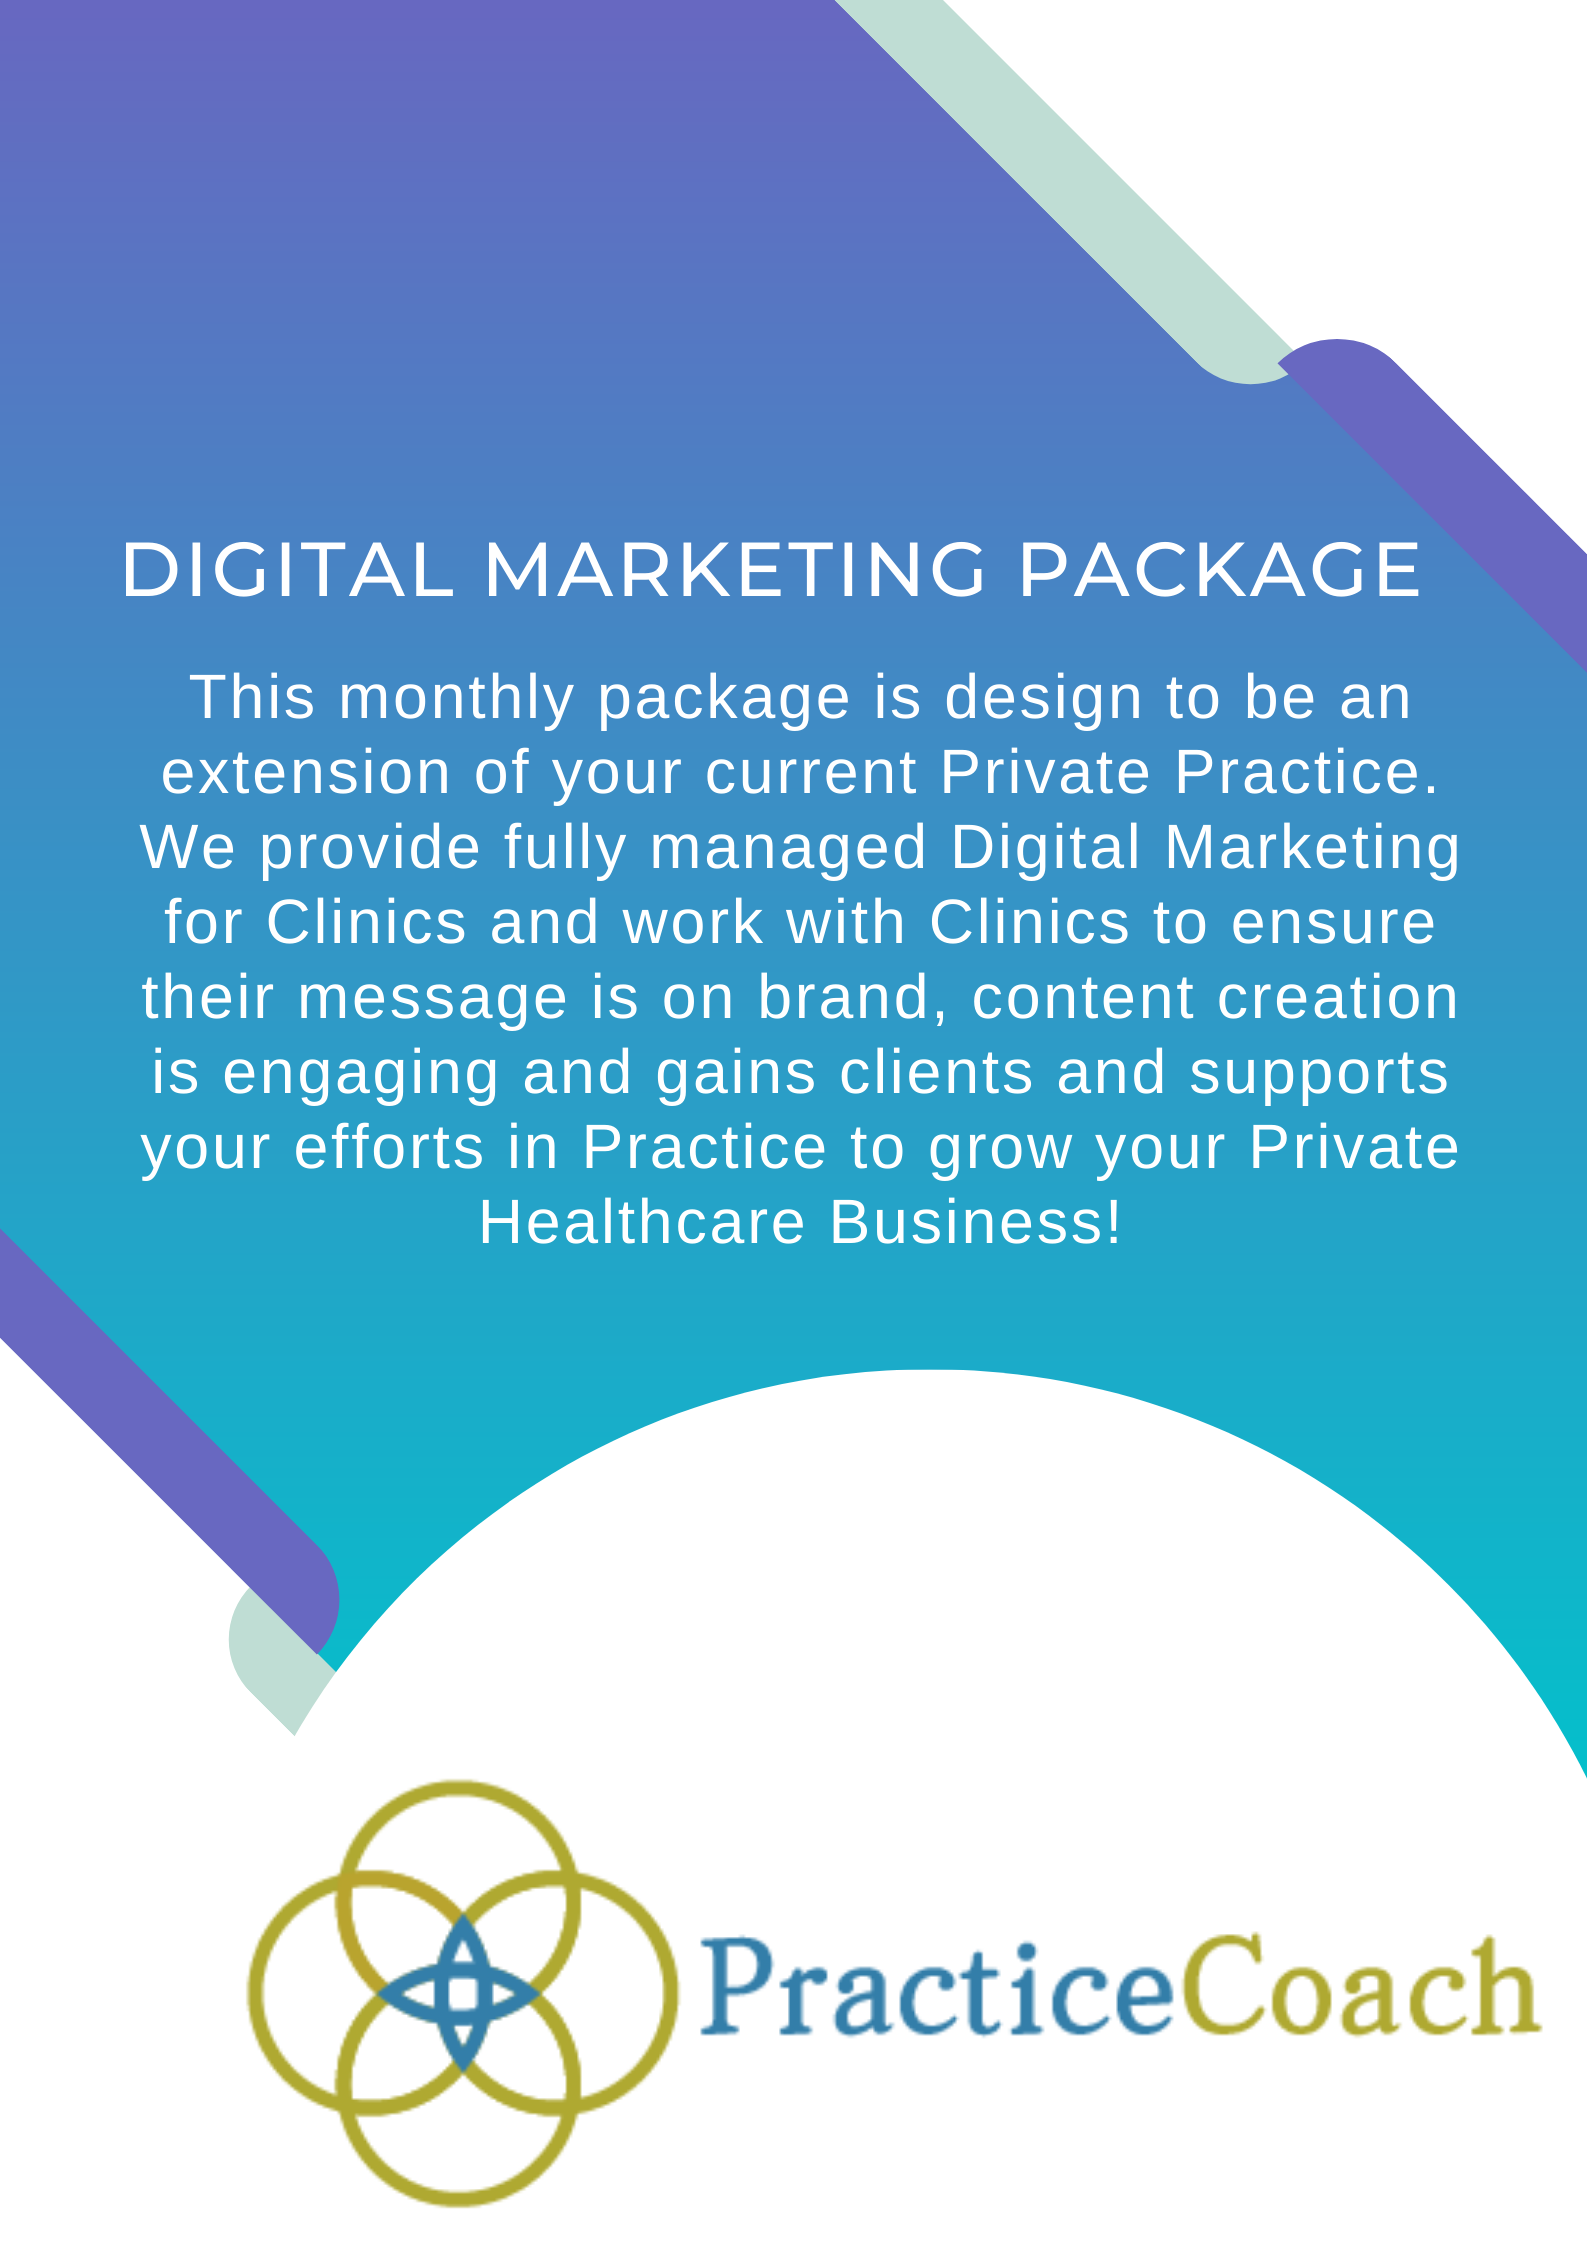 Digital Marketing Package - Practice Coach Clinic